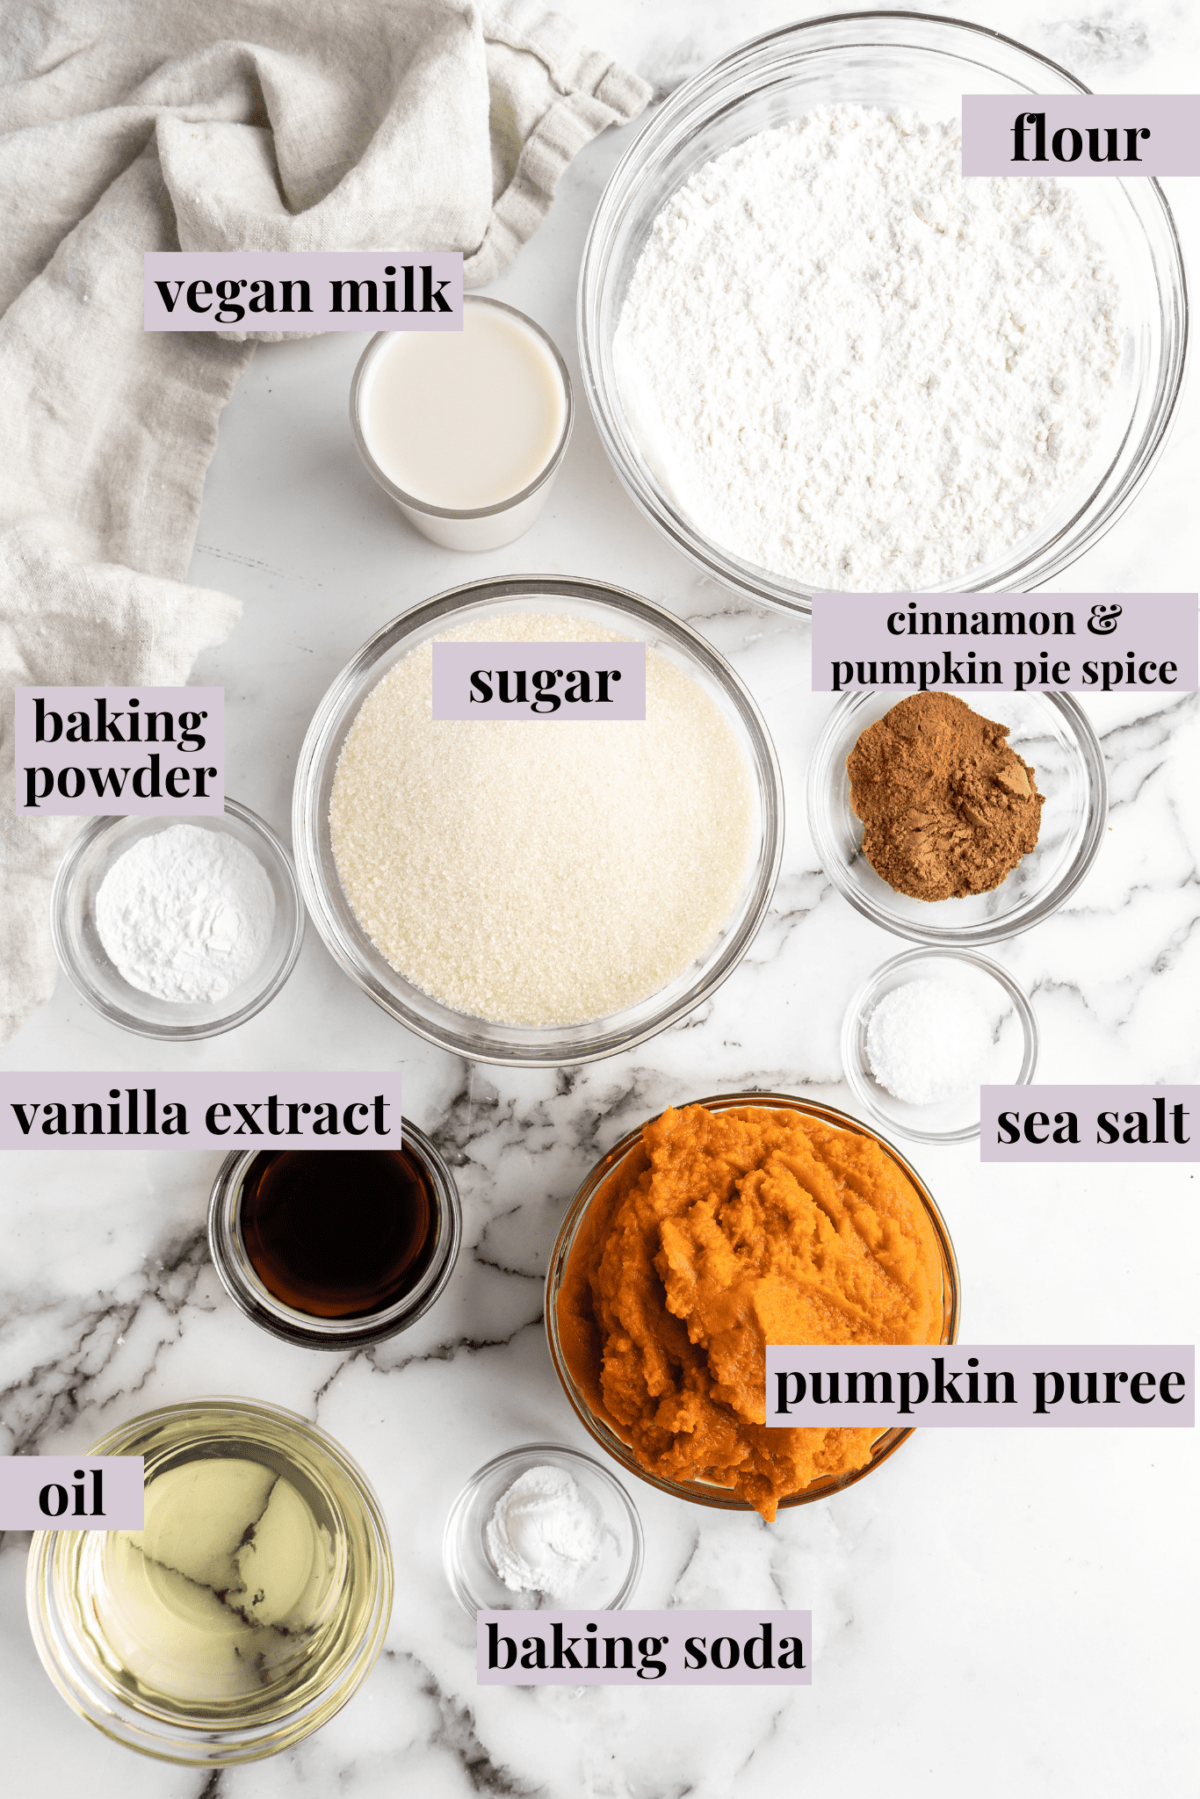 Overhead view of the labeled ingredients for pumpkin cupcakes: a bowl of flour, a bowl of sugar, a bowl of pumpkin puree, a bowl of vanilla extract, a bowl of sea salt, a bowl of baking powder, a bowl of baking soda, a bowl of vegan milk, a bowl of oil, and a bowl of cinnamon and pumpkin pie spice